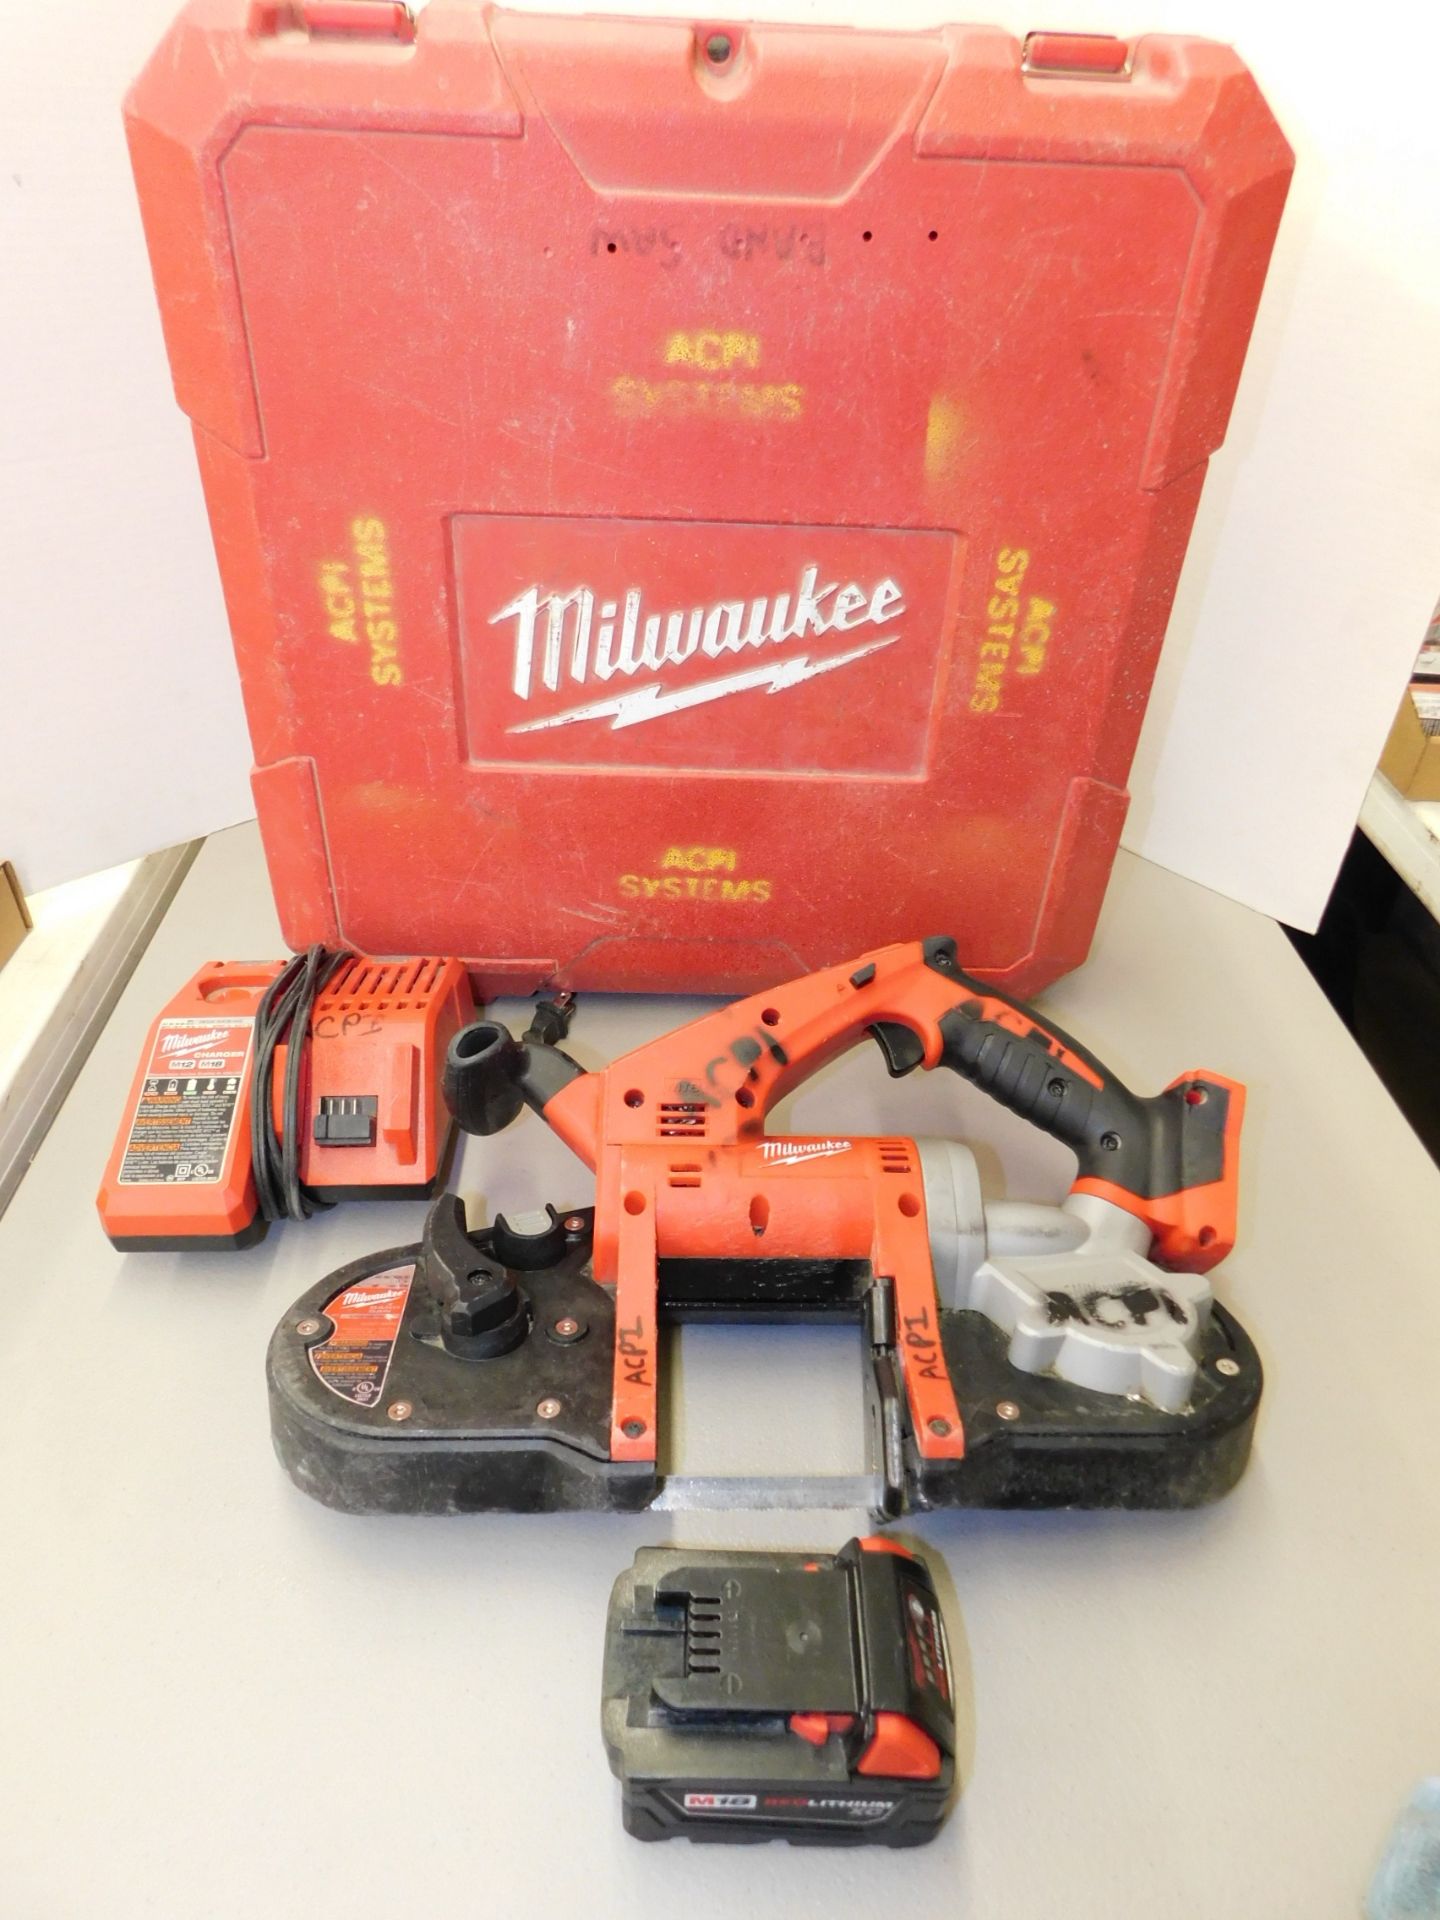 Milwaukee Model 2629-20 18V Cordless Portable Bandsaw with Battery and Charger